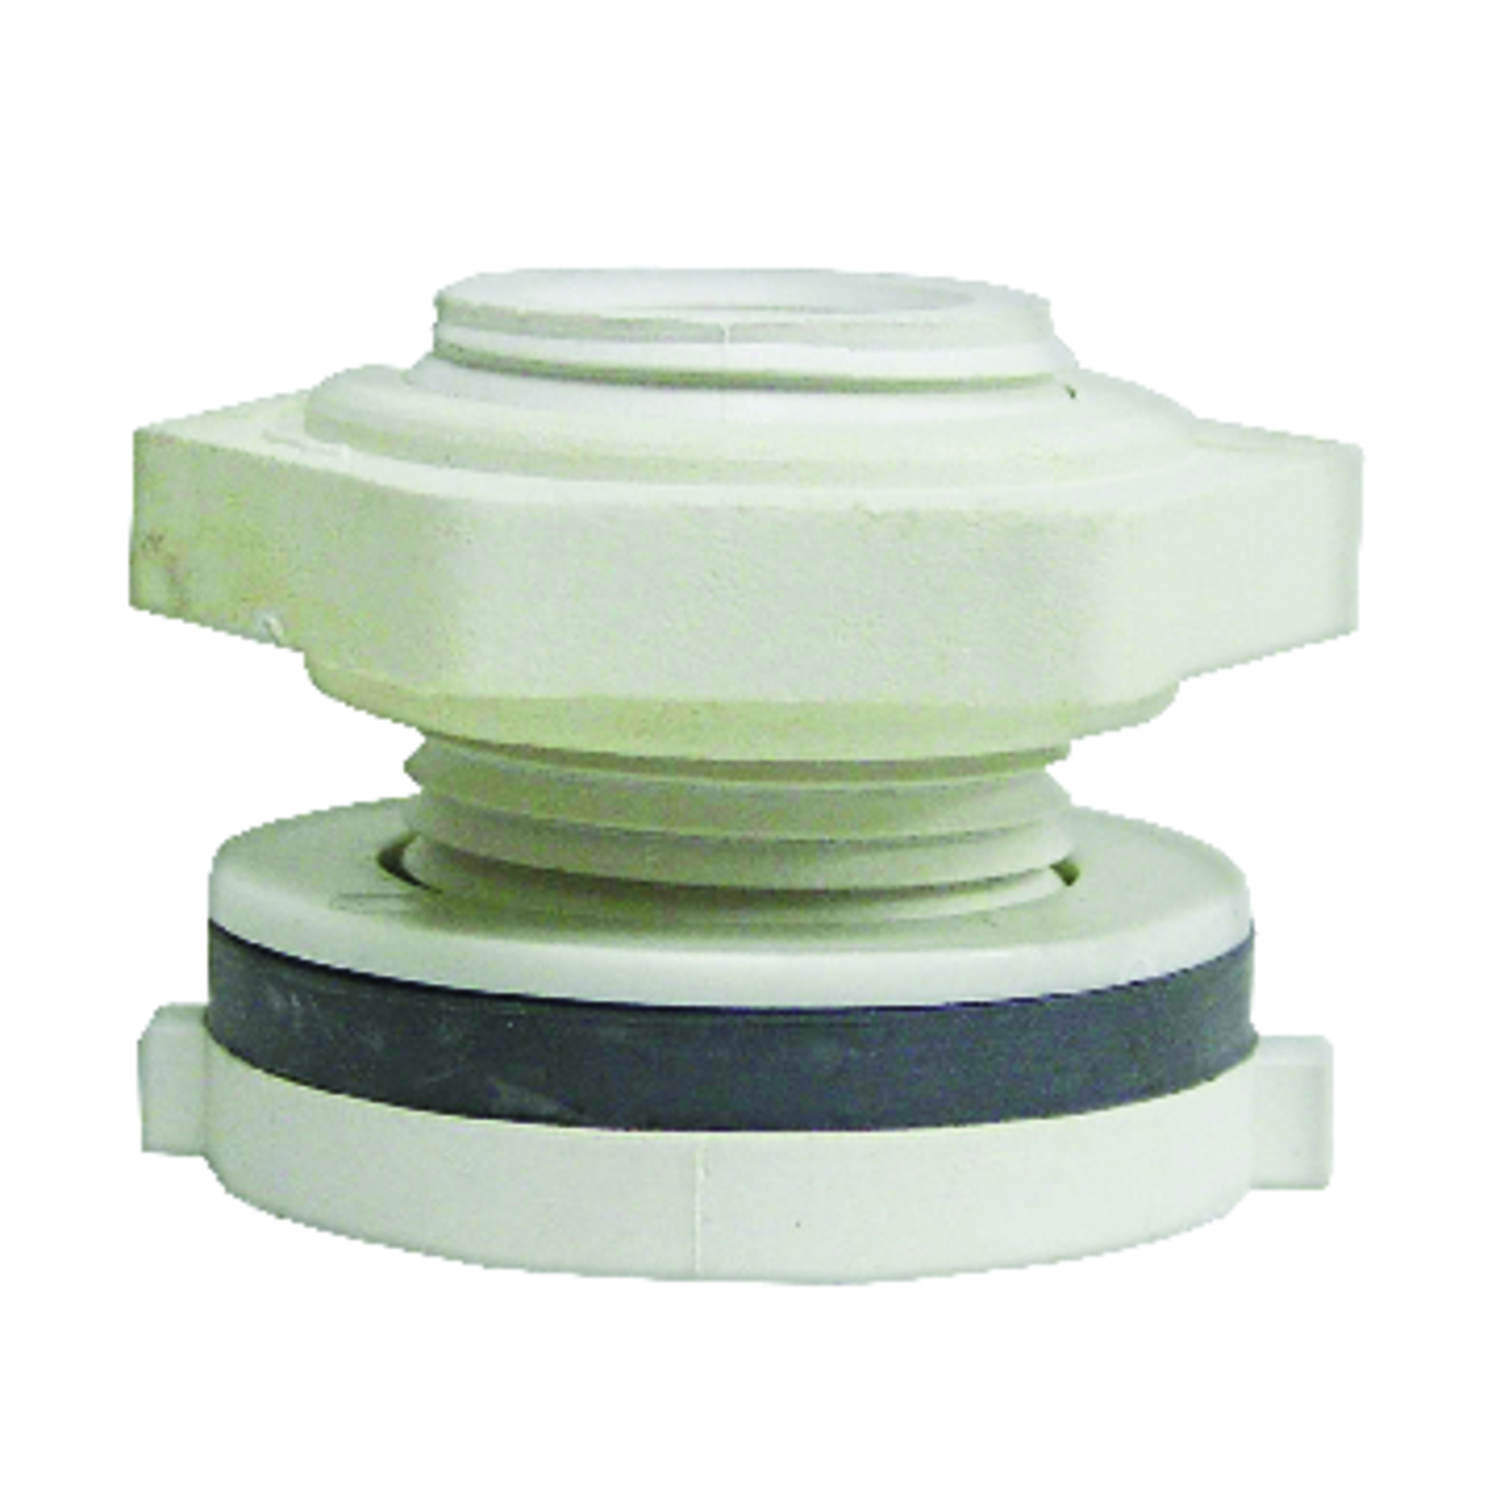 Green Leaf Inc. 1/2 in. Polypropylene Bulkhead Fitting at Tractor Supply Co.